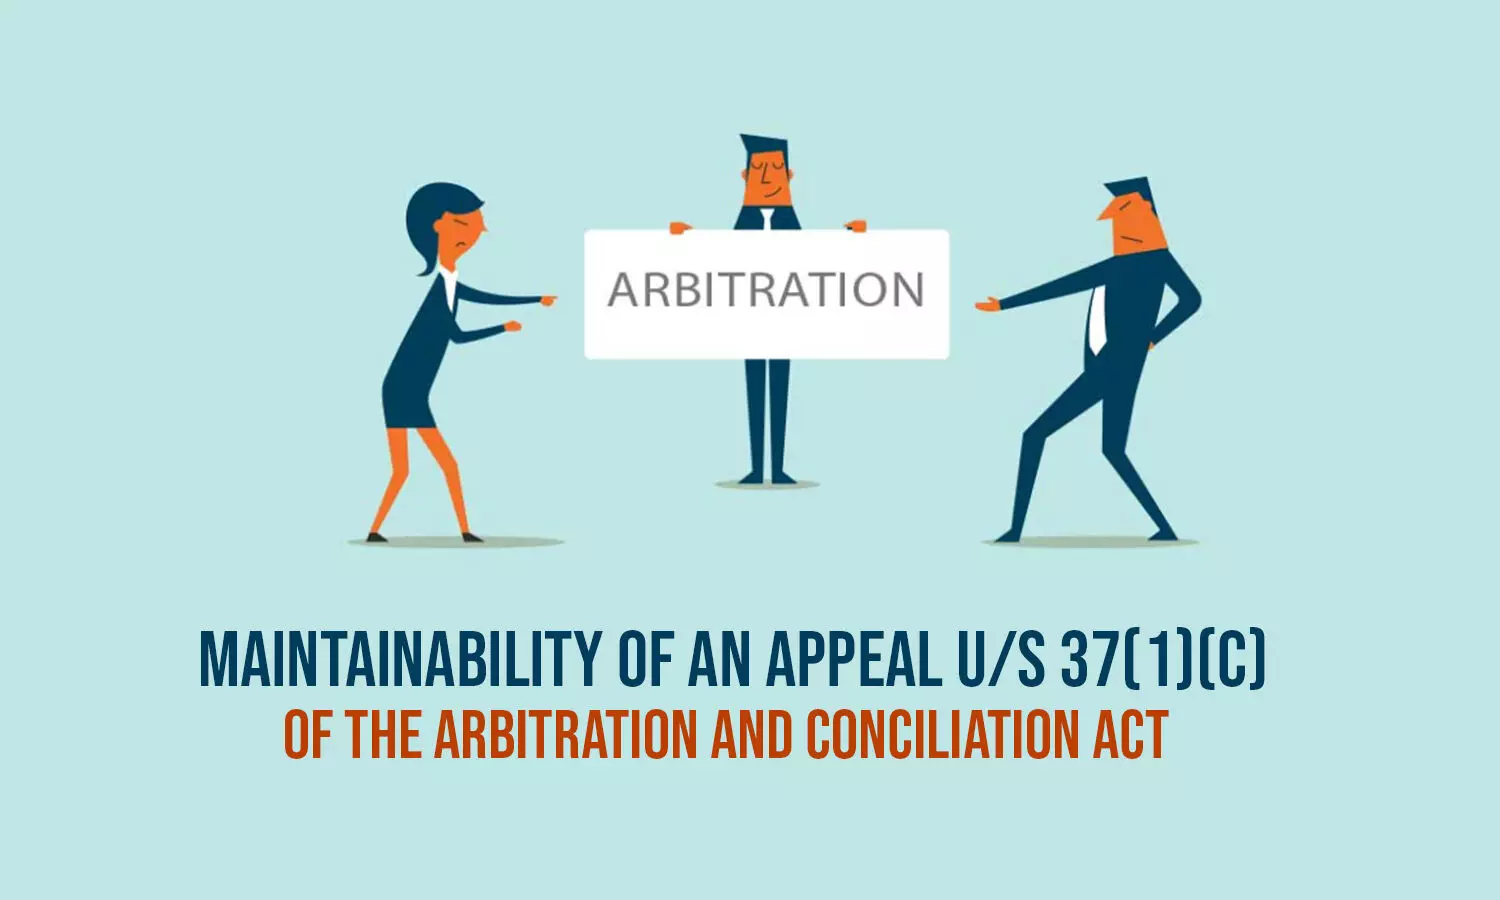 Maintainability of an Appeal u/s 37(1)(c) of the Arbitration and Conciliation Act